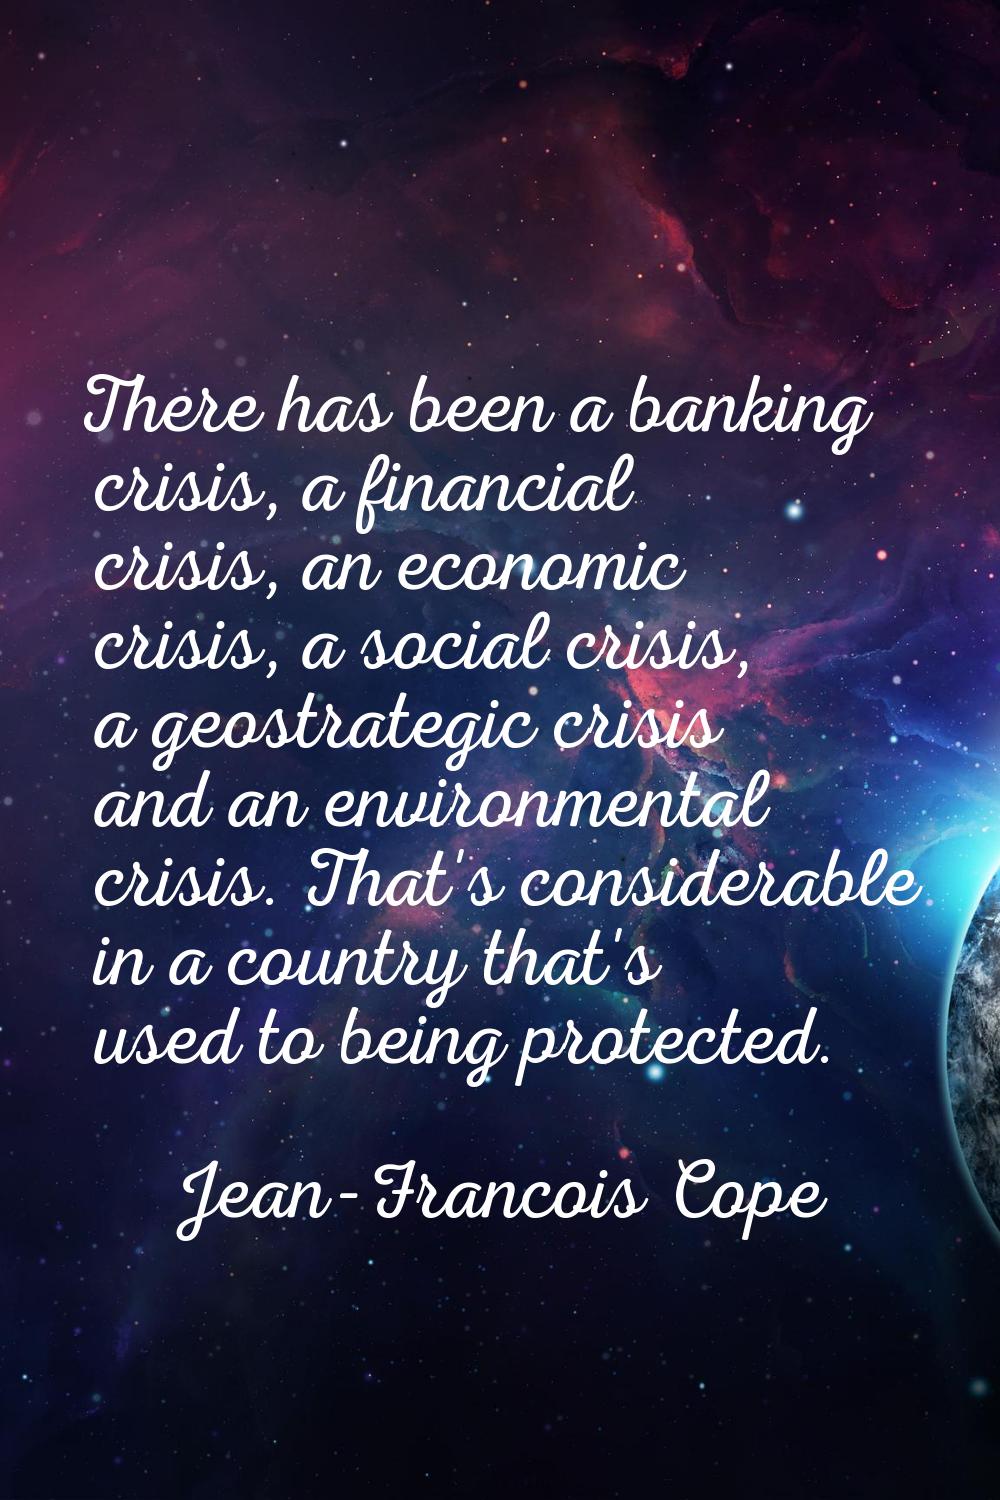 There has been a banking crisis, a financial crisis, an economic crisis, a social crisis, a geostra